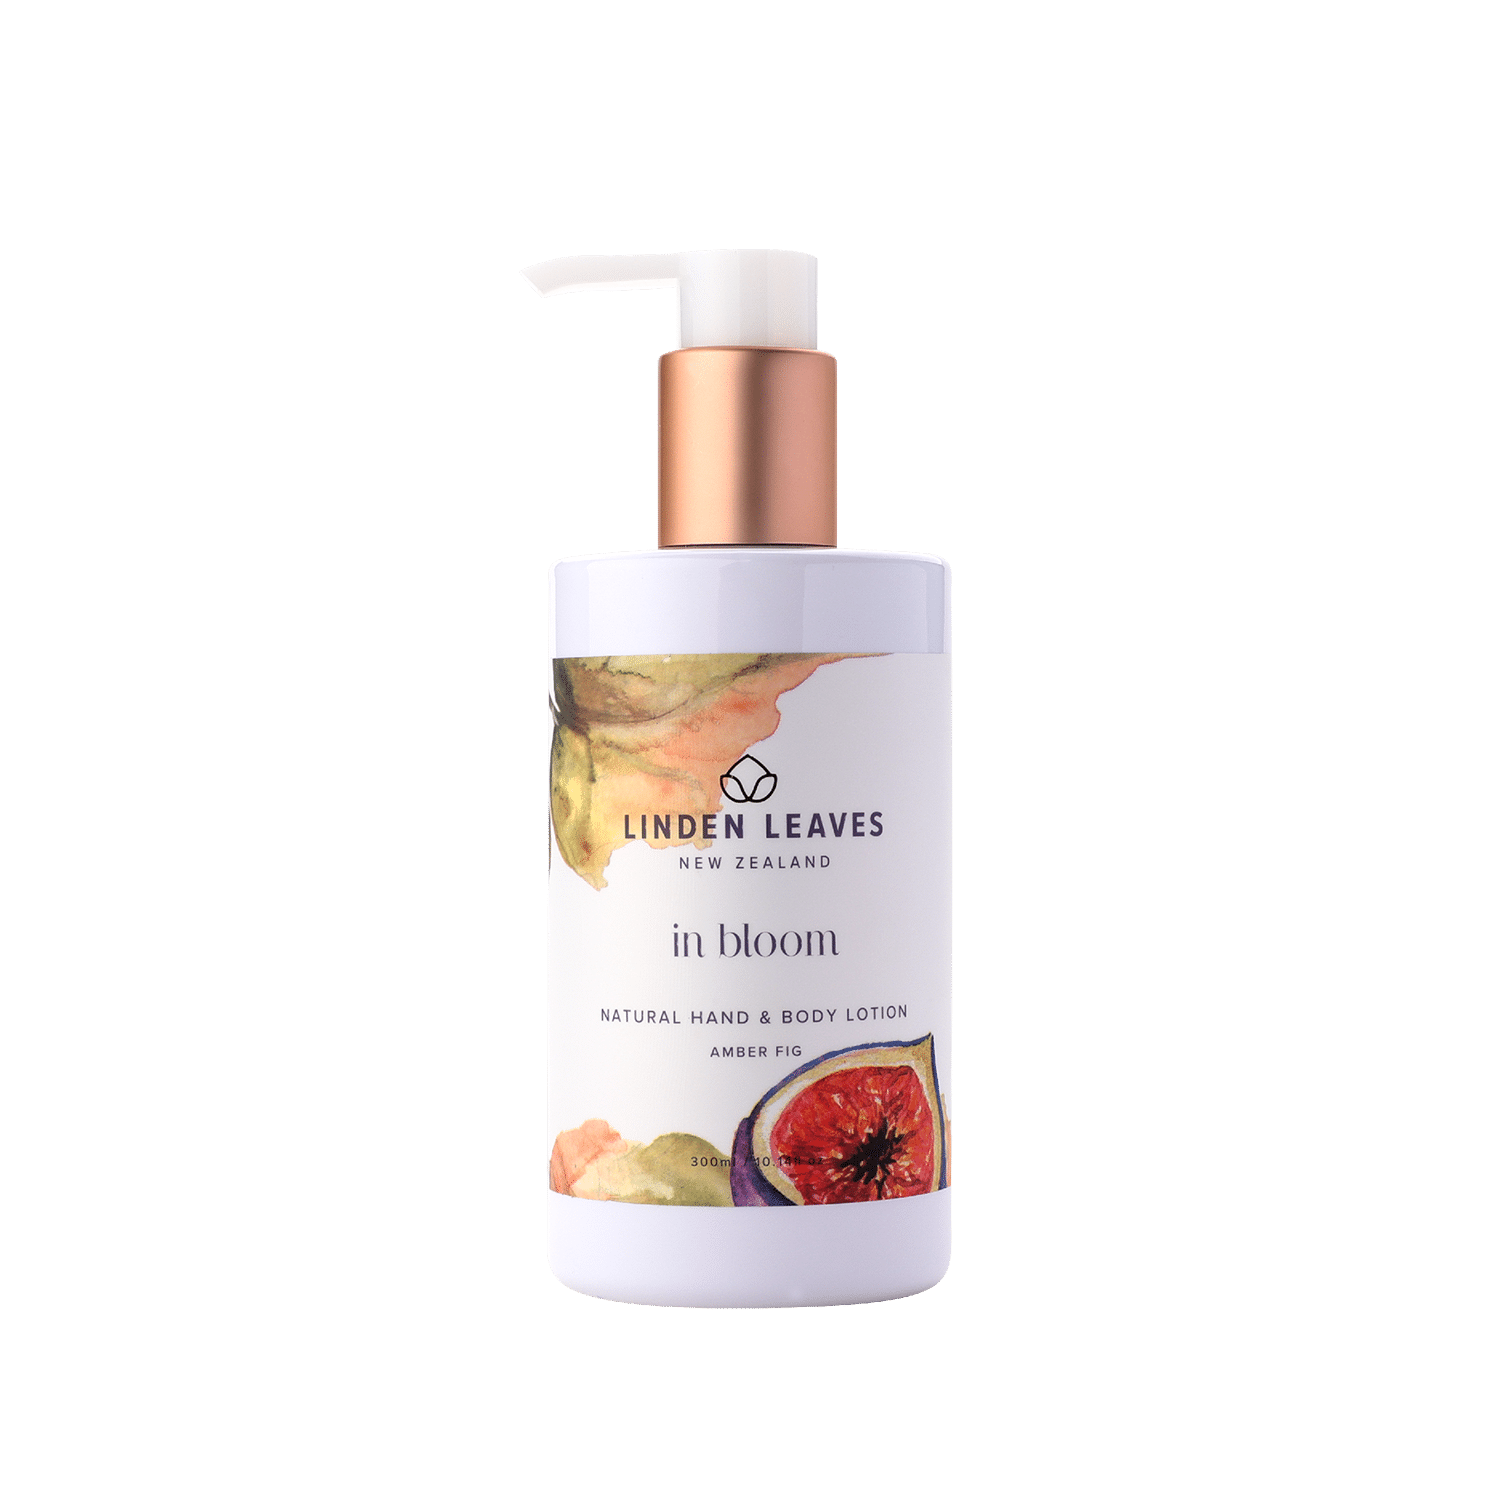 Linden Leaves 琳登丽诗 in bloom 绽放系列 hand & body lotion 润肤乳 amber fig 琥珀红心果 300ml